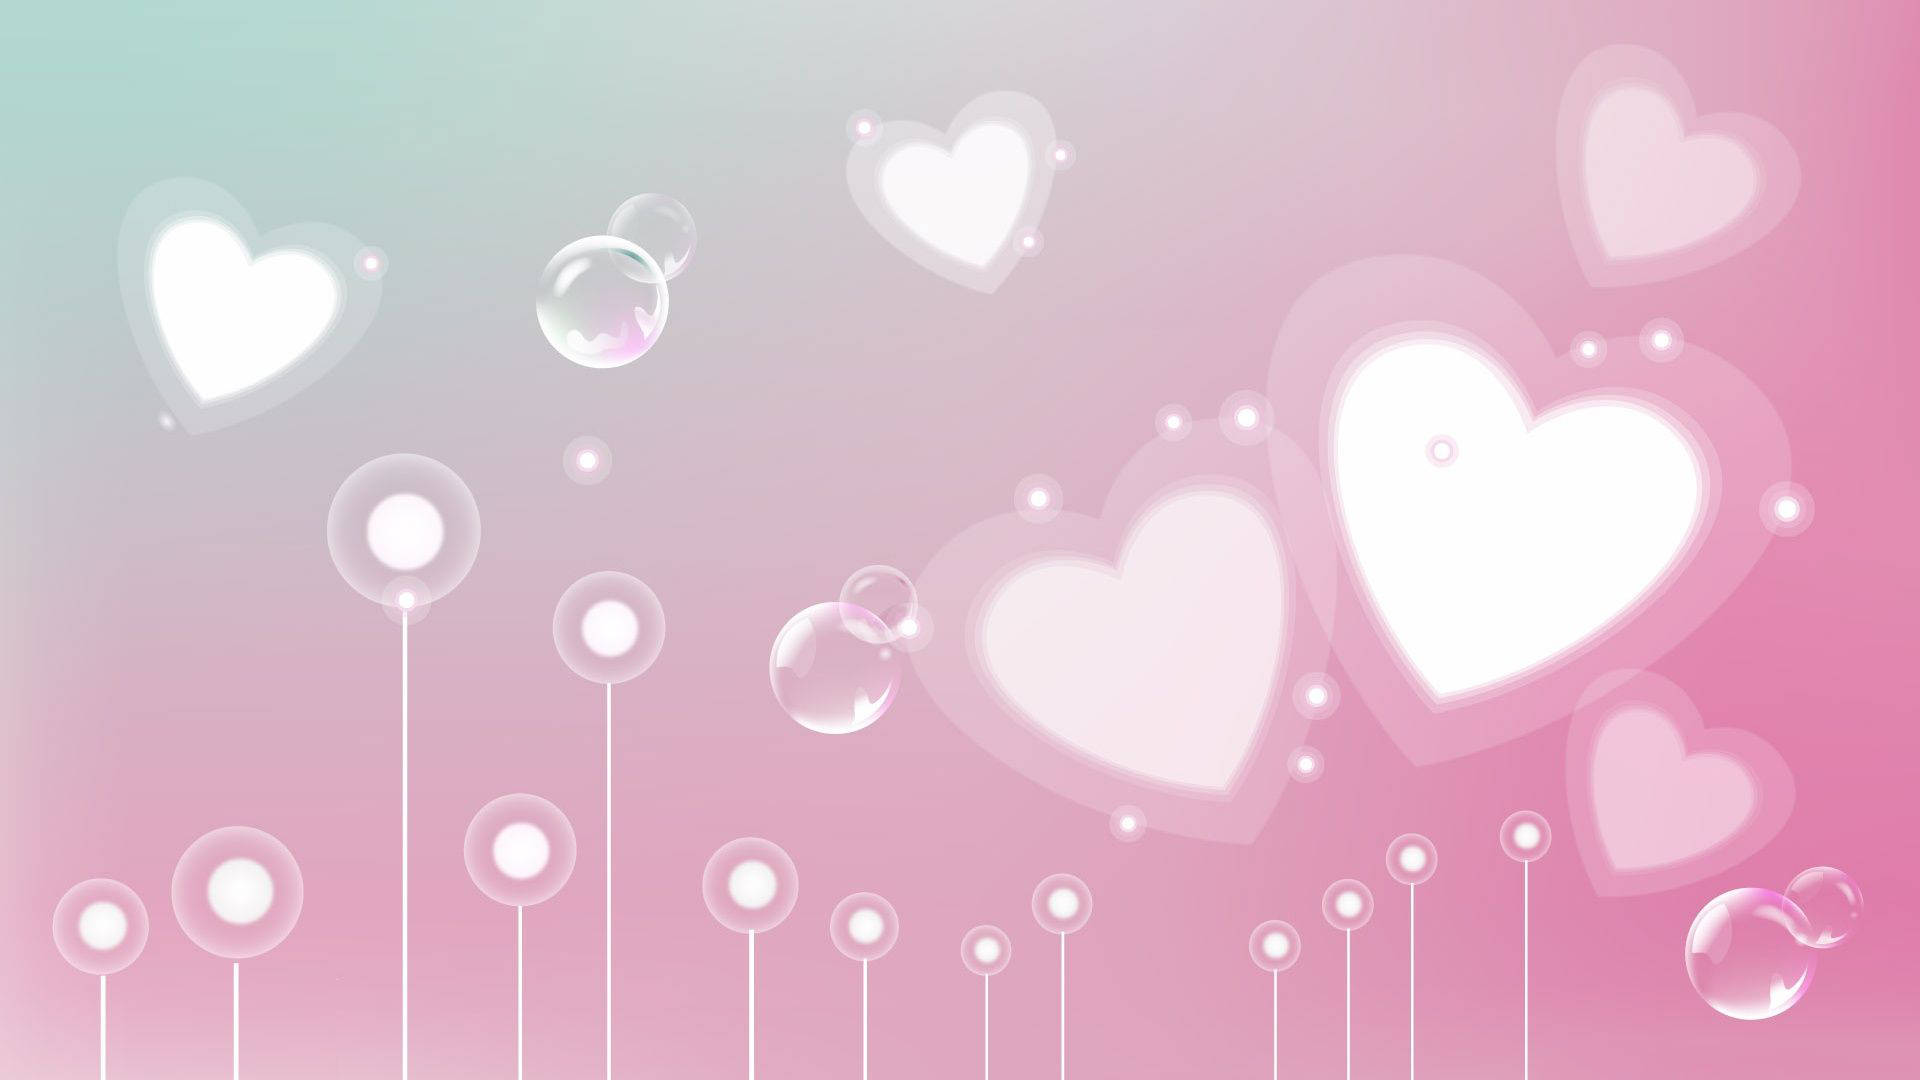 Cute Pastel Colors Heart Shapes Background